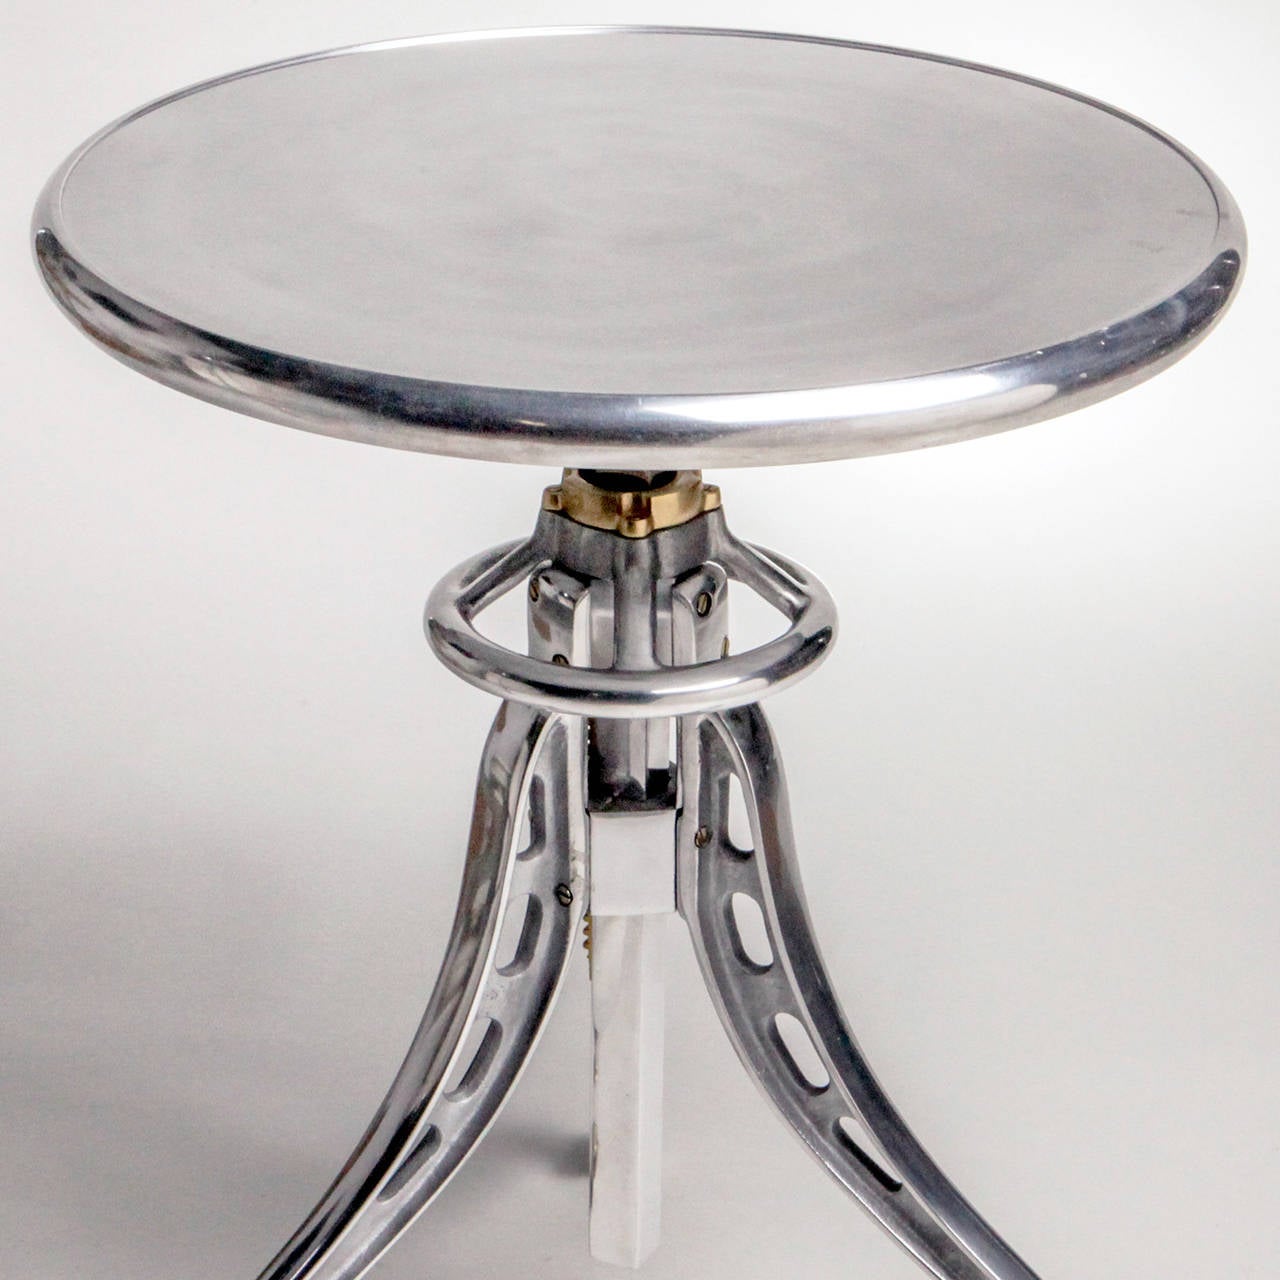 Industrial look polished aluminum table on adjustable tripod base with casters.